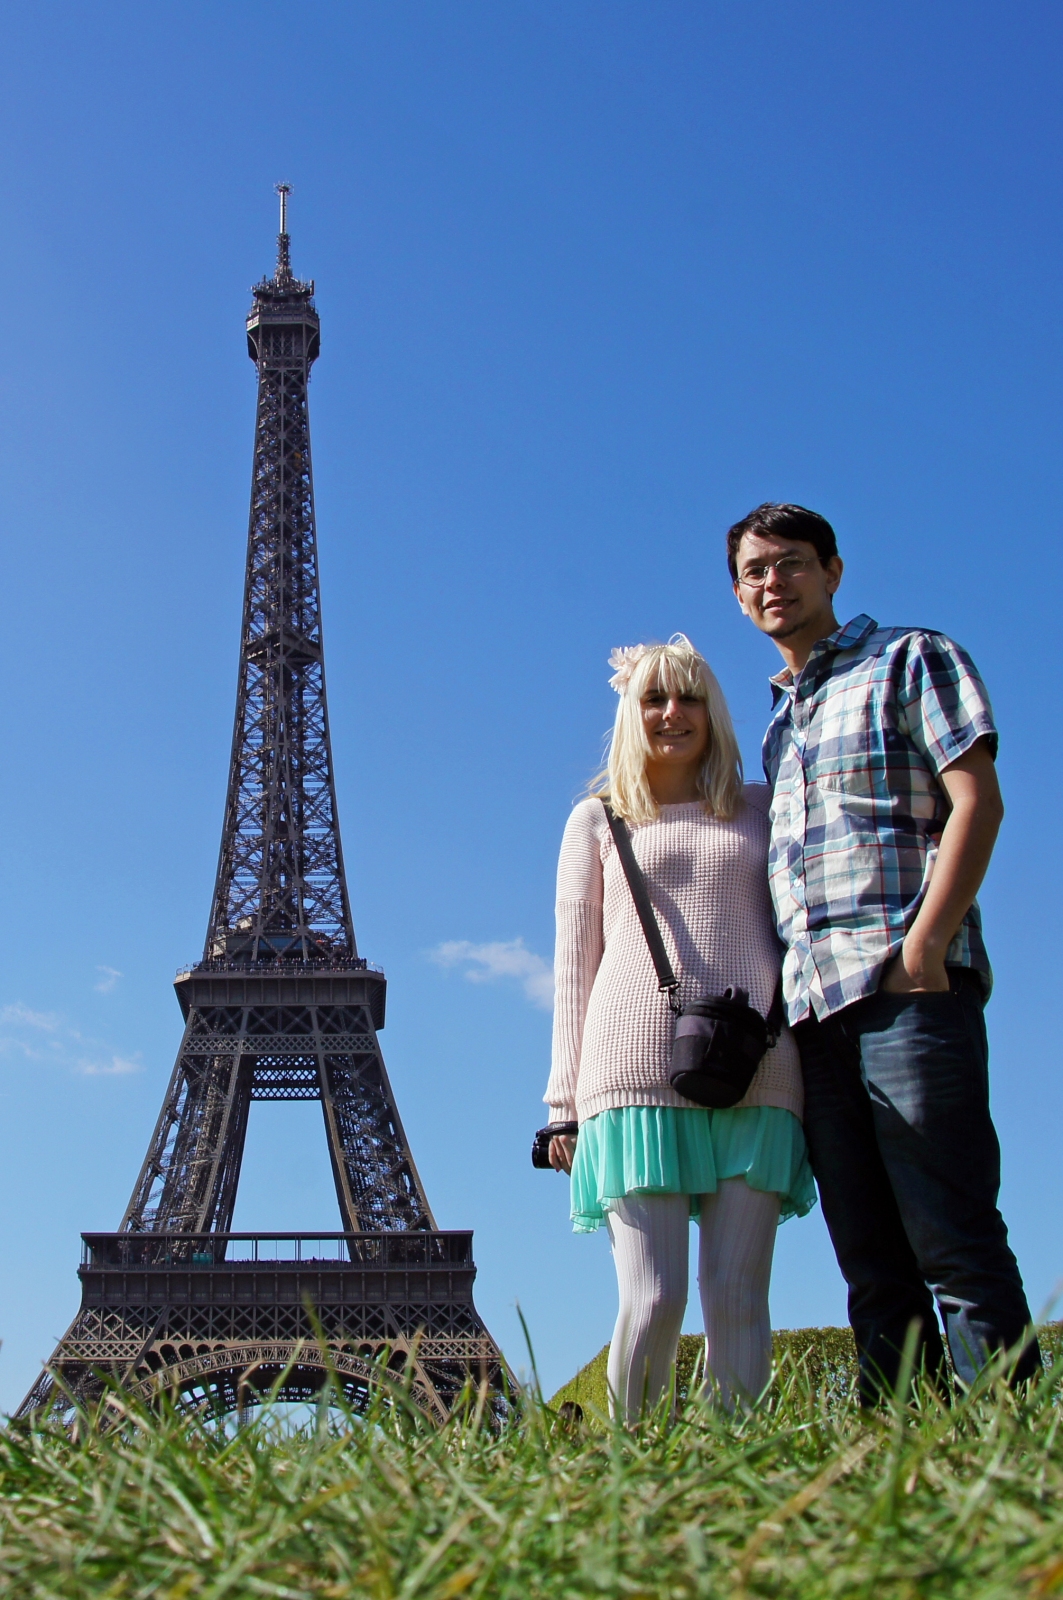 Josh and Lisa Infront of the Eiffel Tower